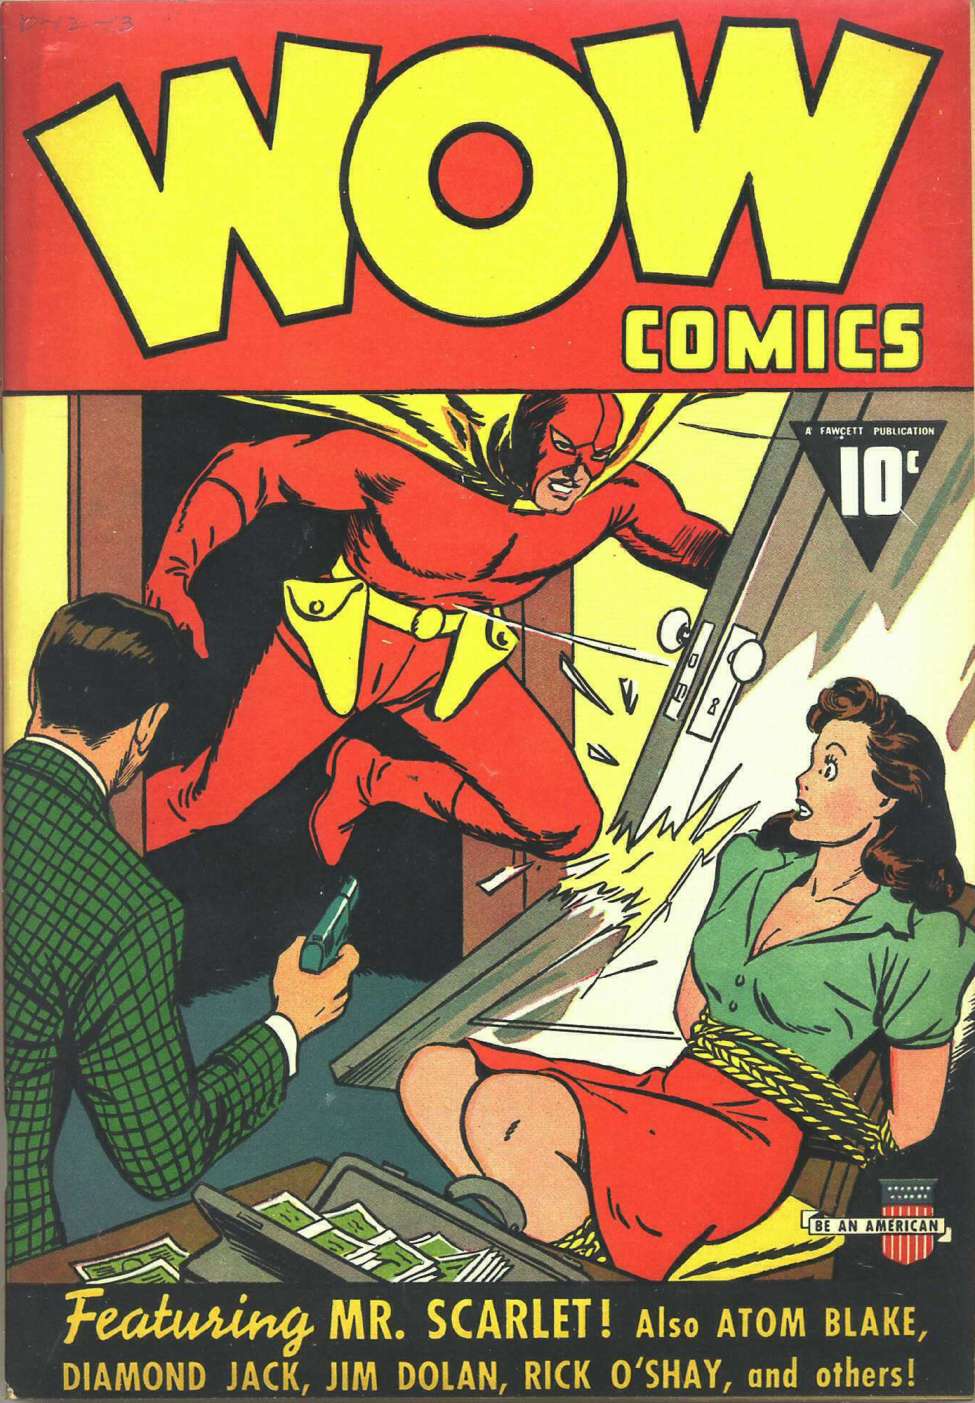 Book Cover For Wow Comics 1 - Version 2